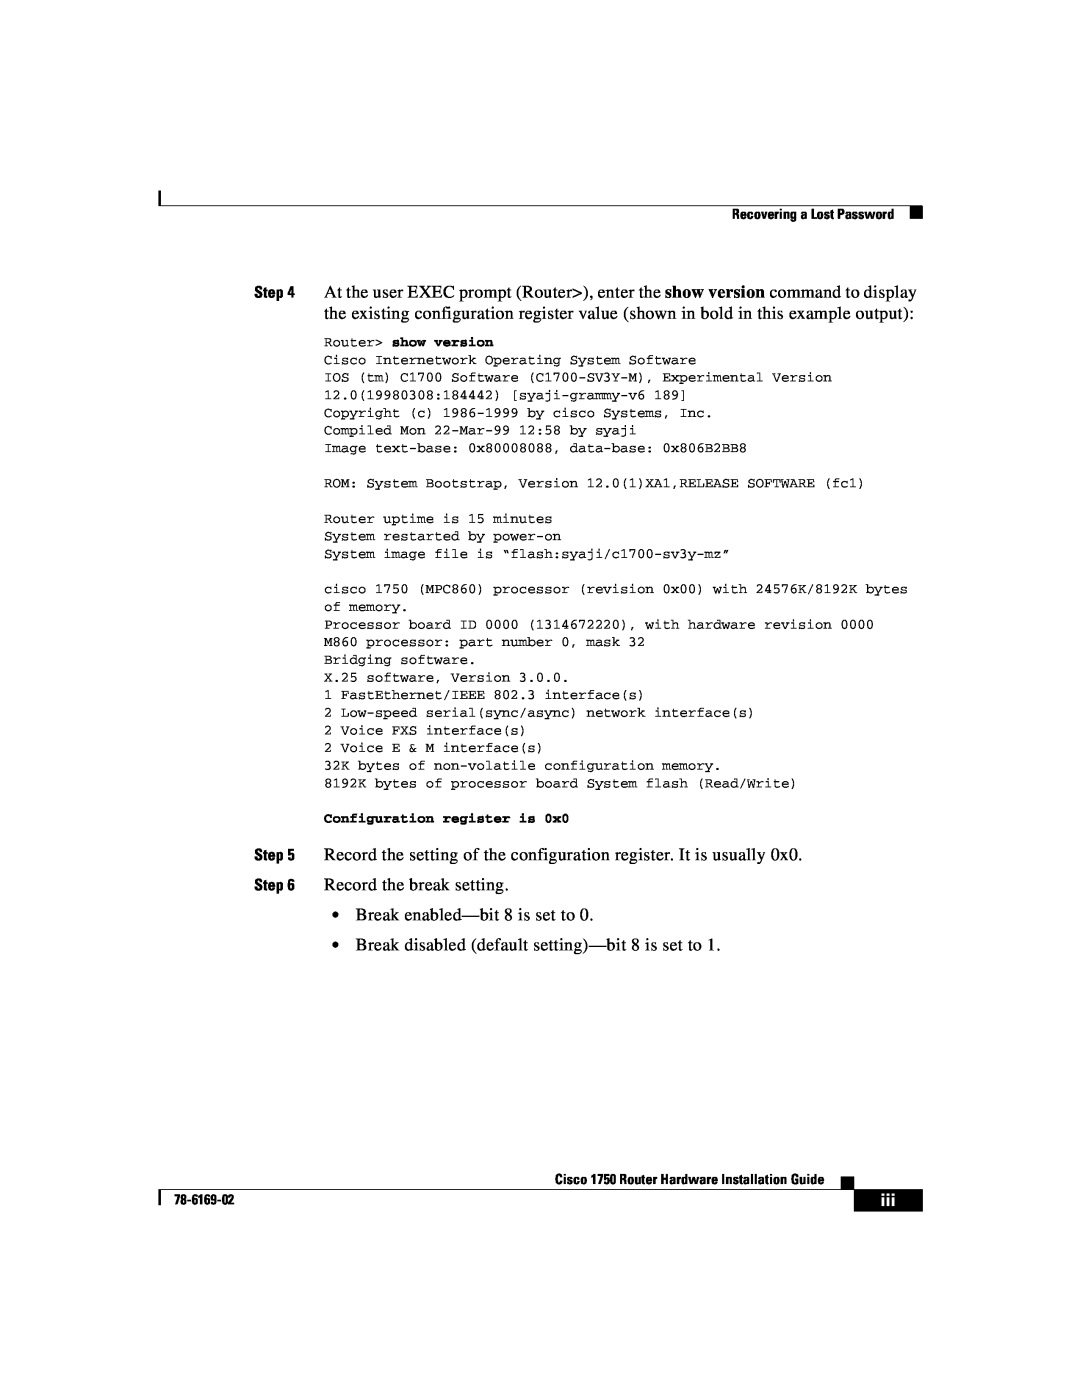 Cisco Systems CISCO1750 manual Record the break setting Break enabled-bit 8 is set to, Router show version 